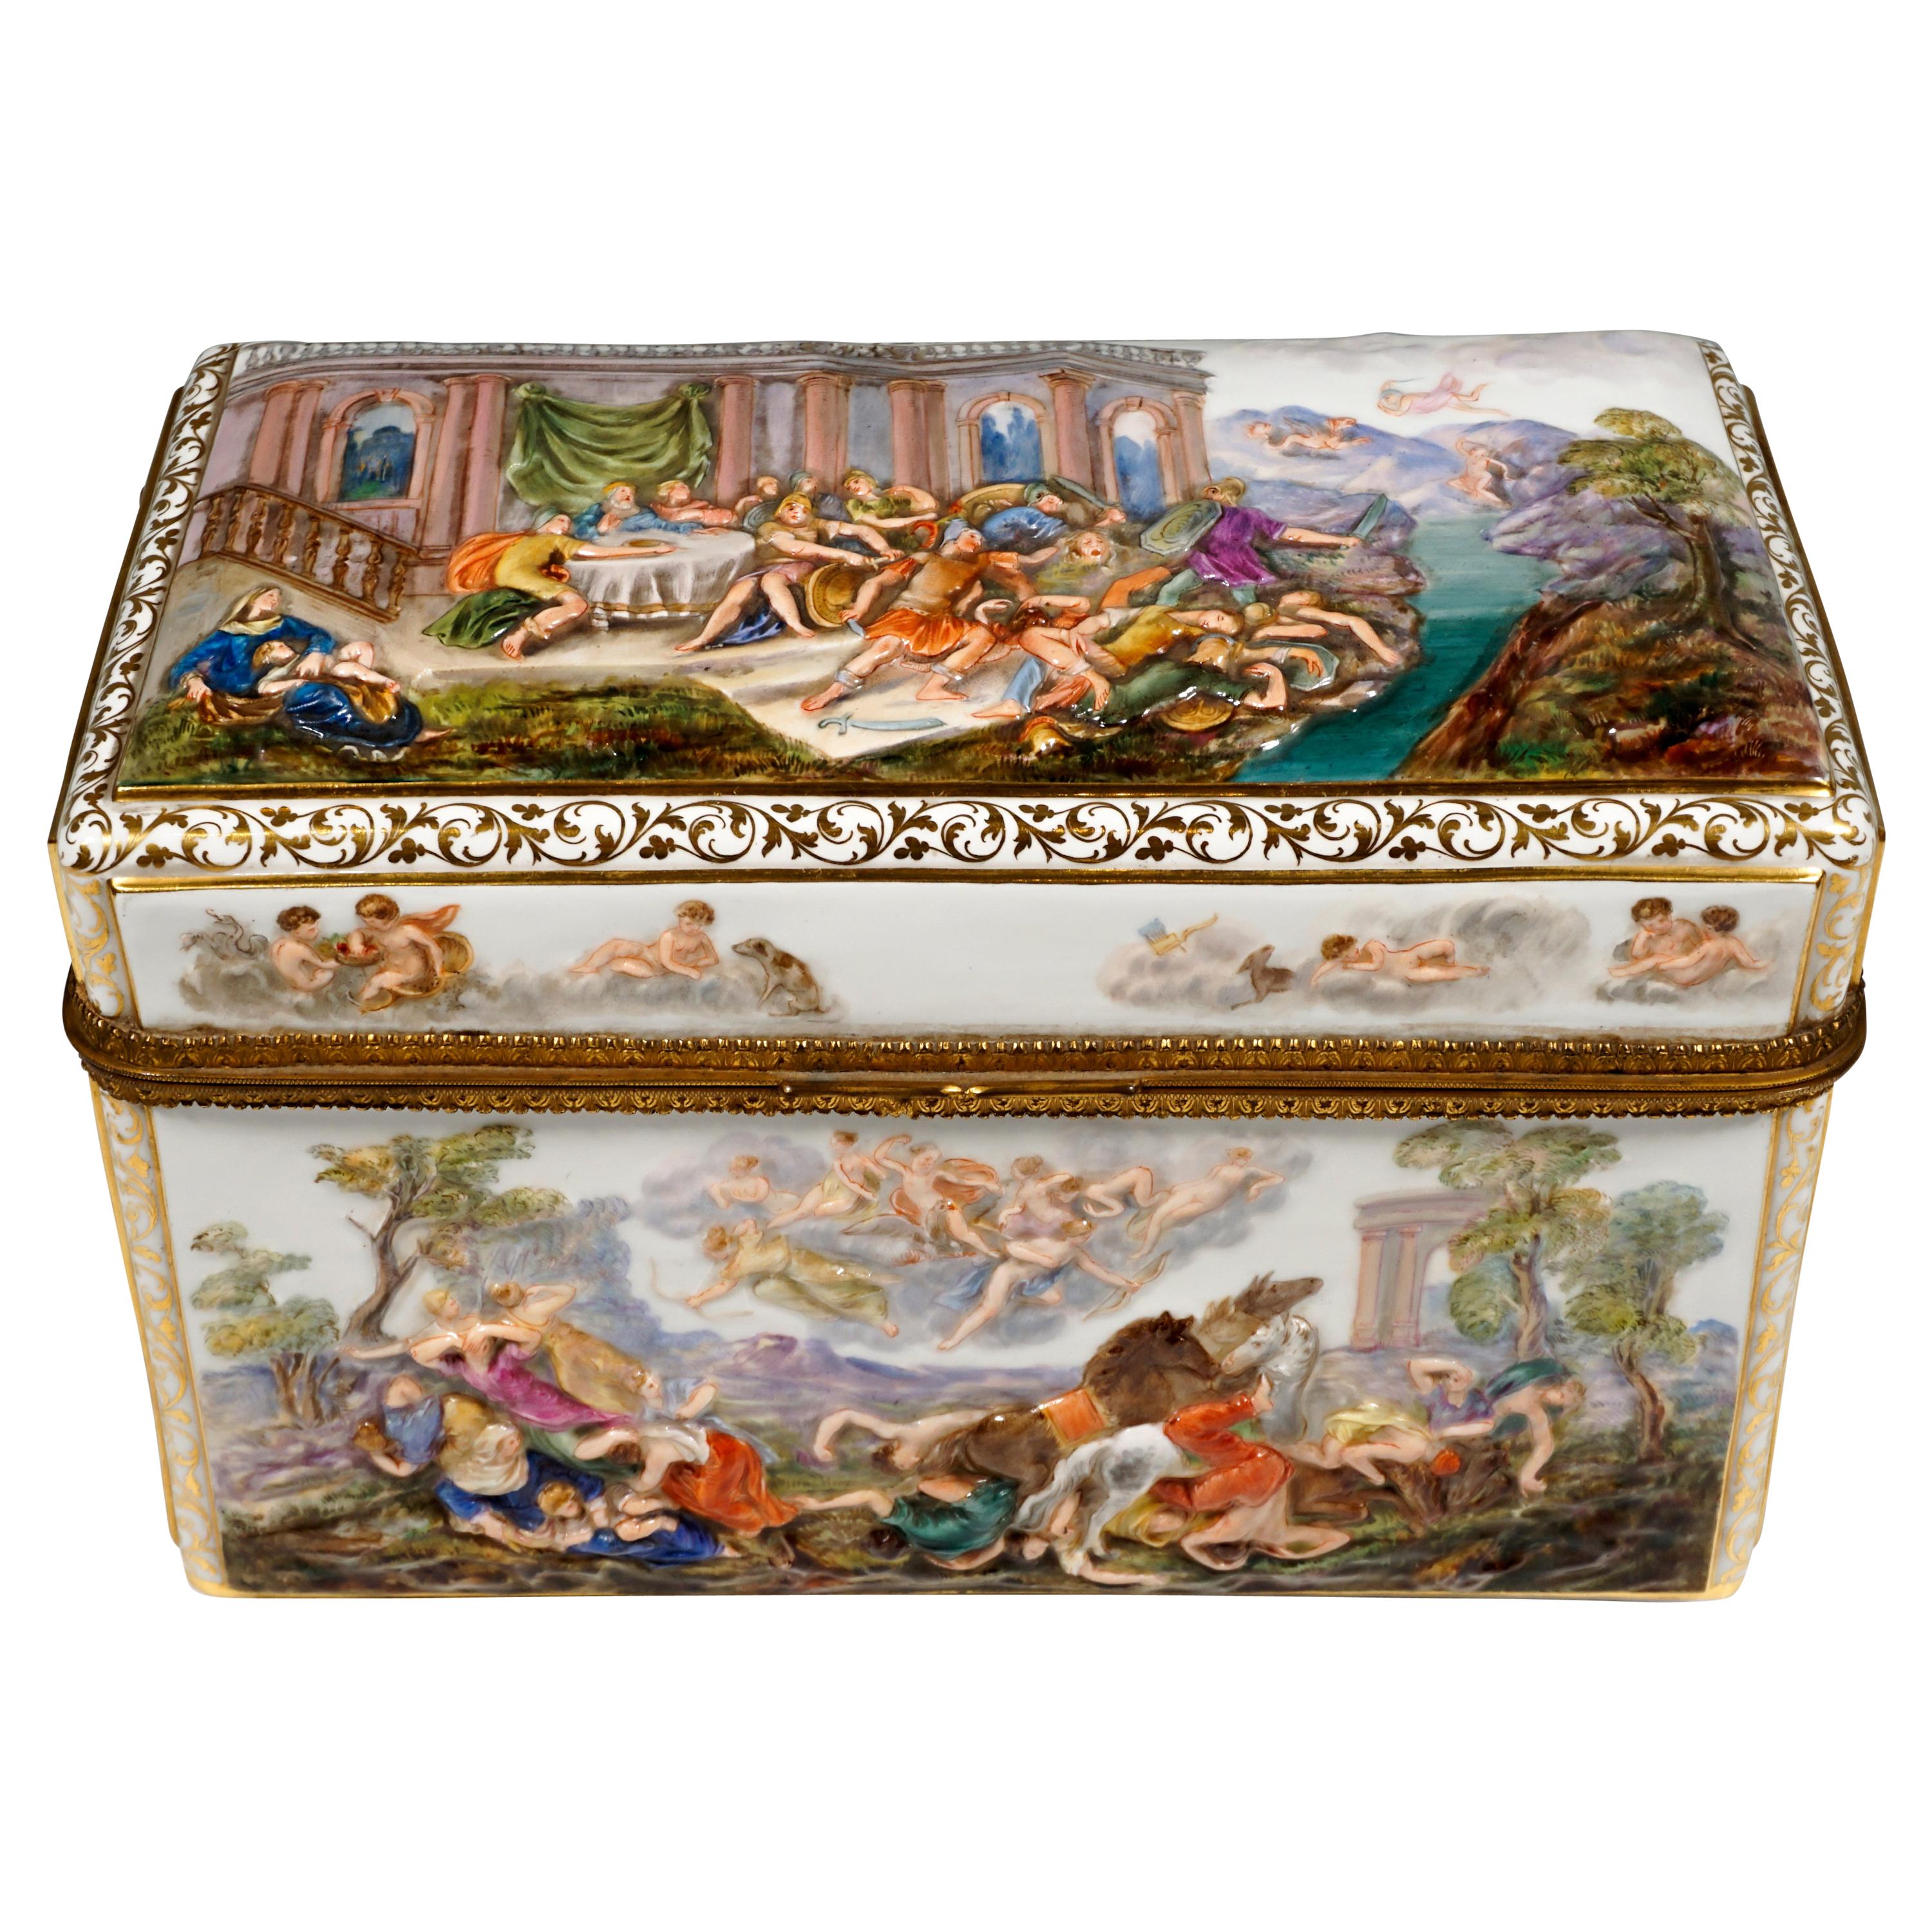 19th Century Meissen Jewelry Box With Colored Greek Mythology Reliefs